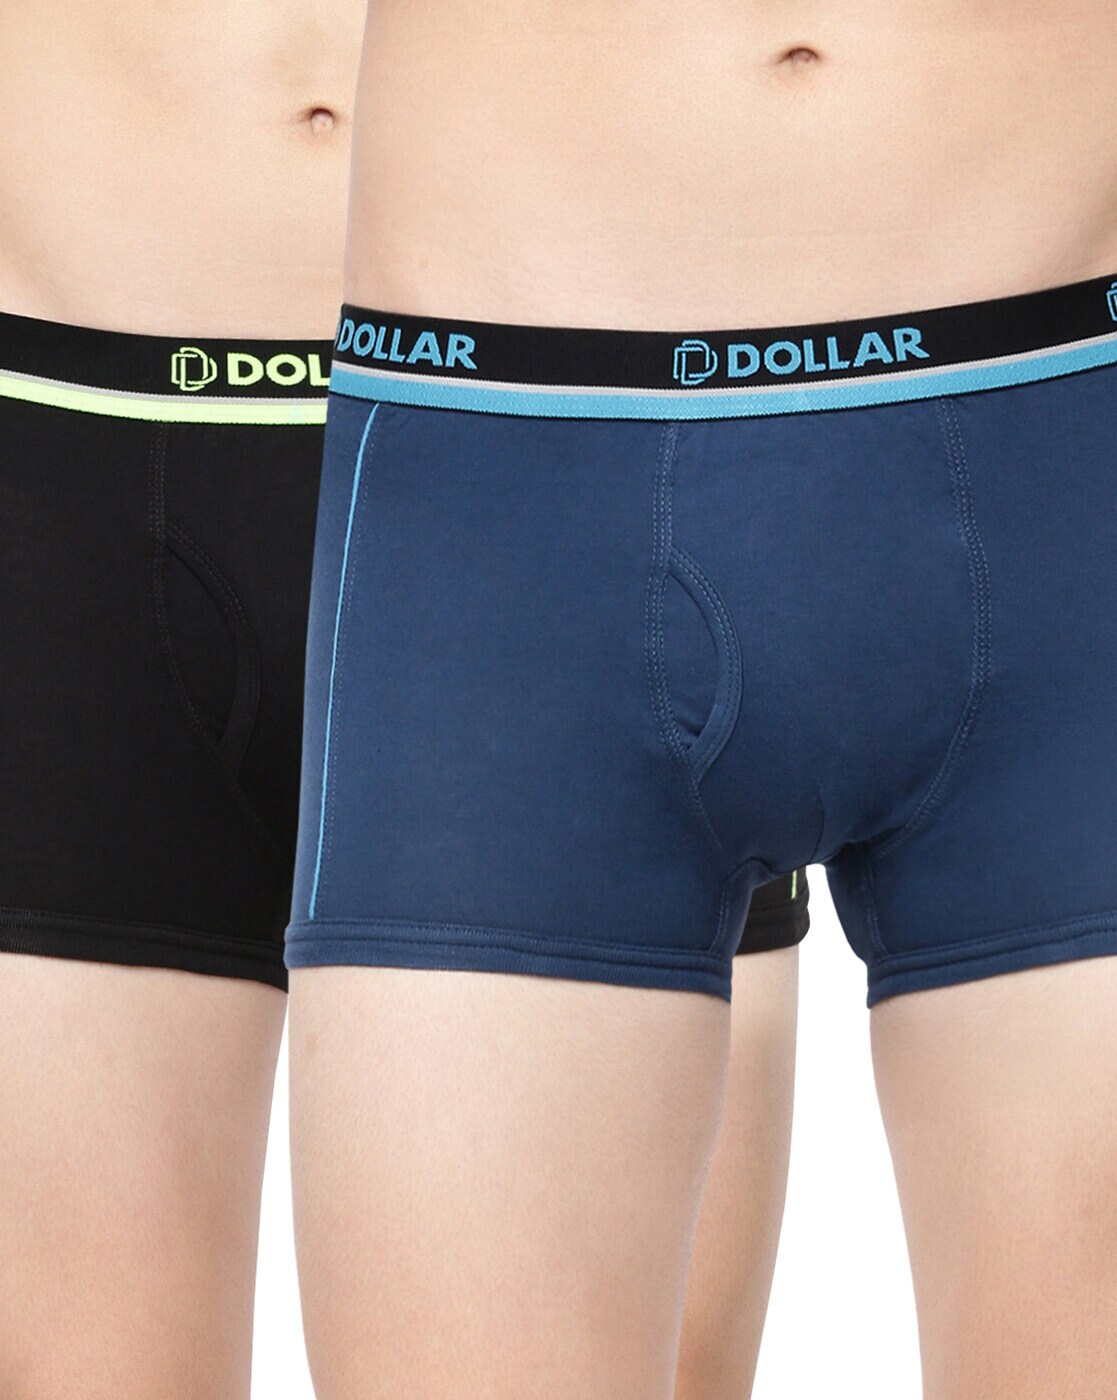 Dollar Bigboss Men's Pack of 2 Combed Cotton Printed Trunk